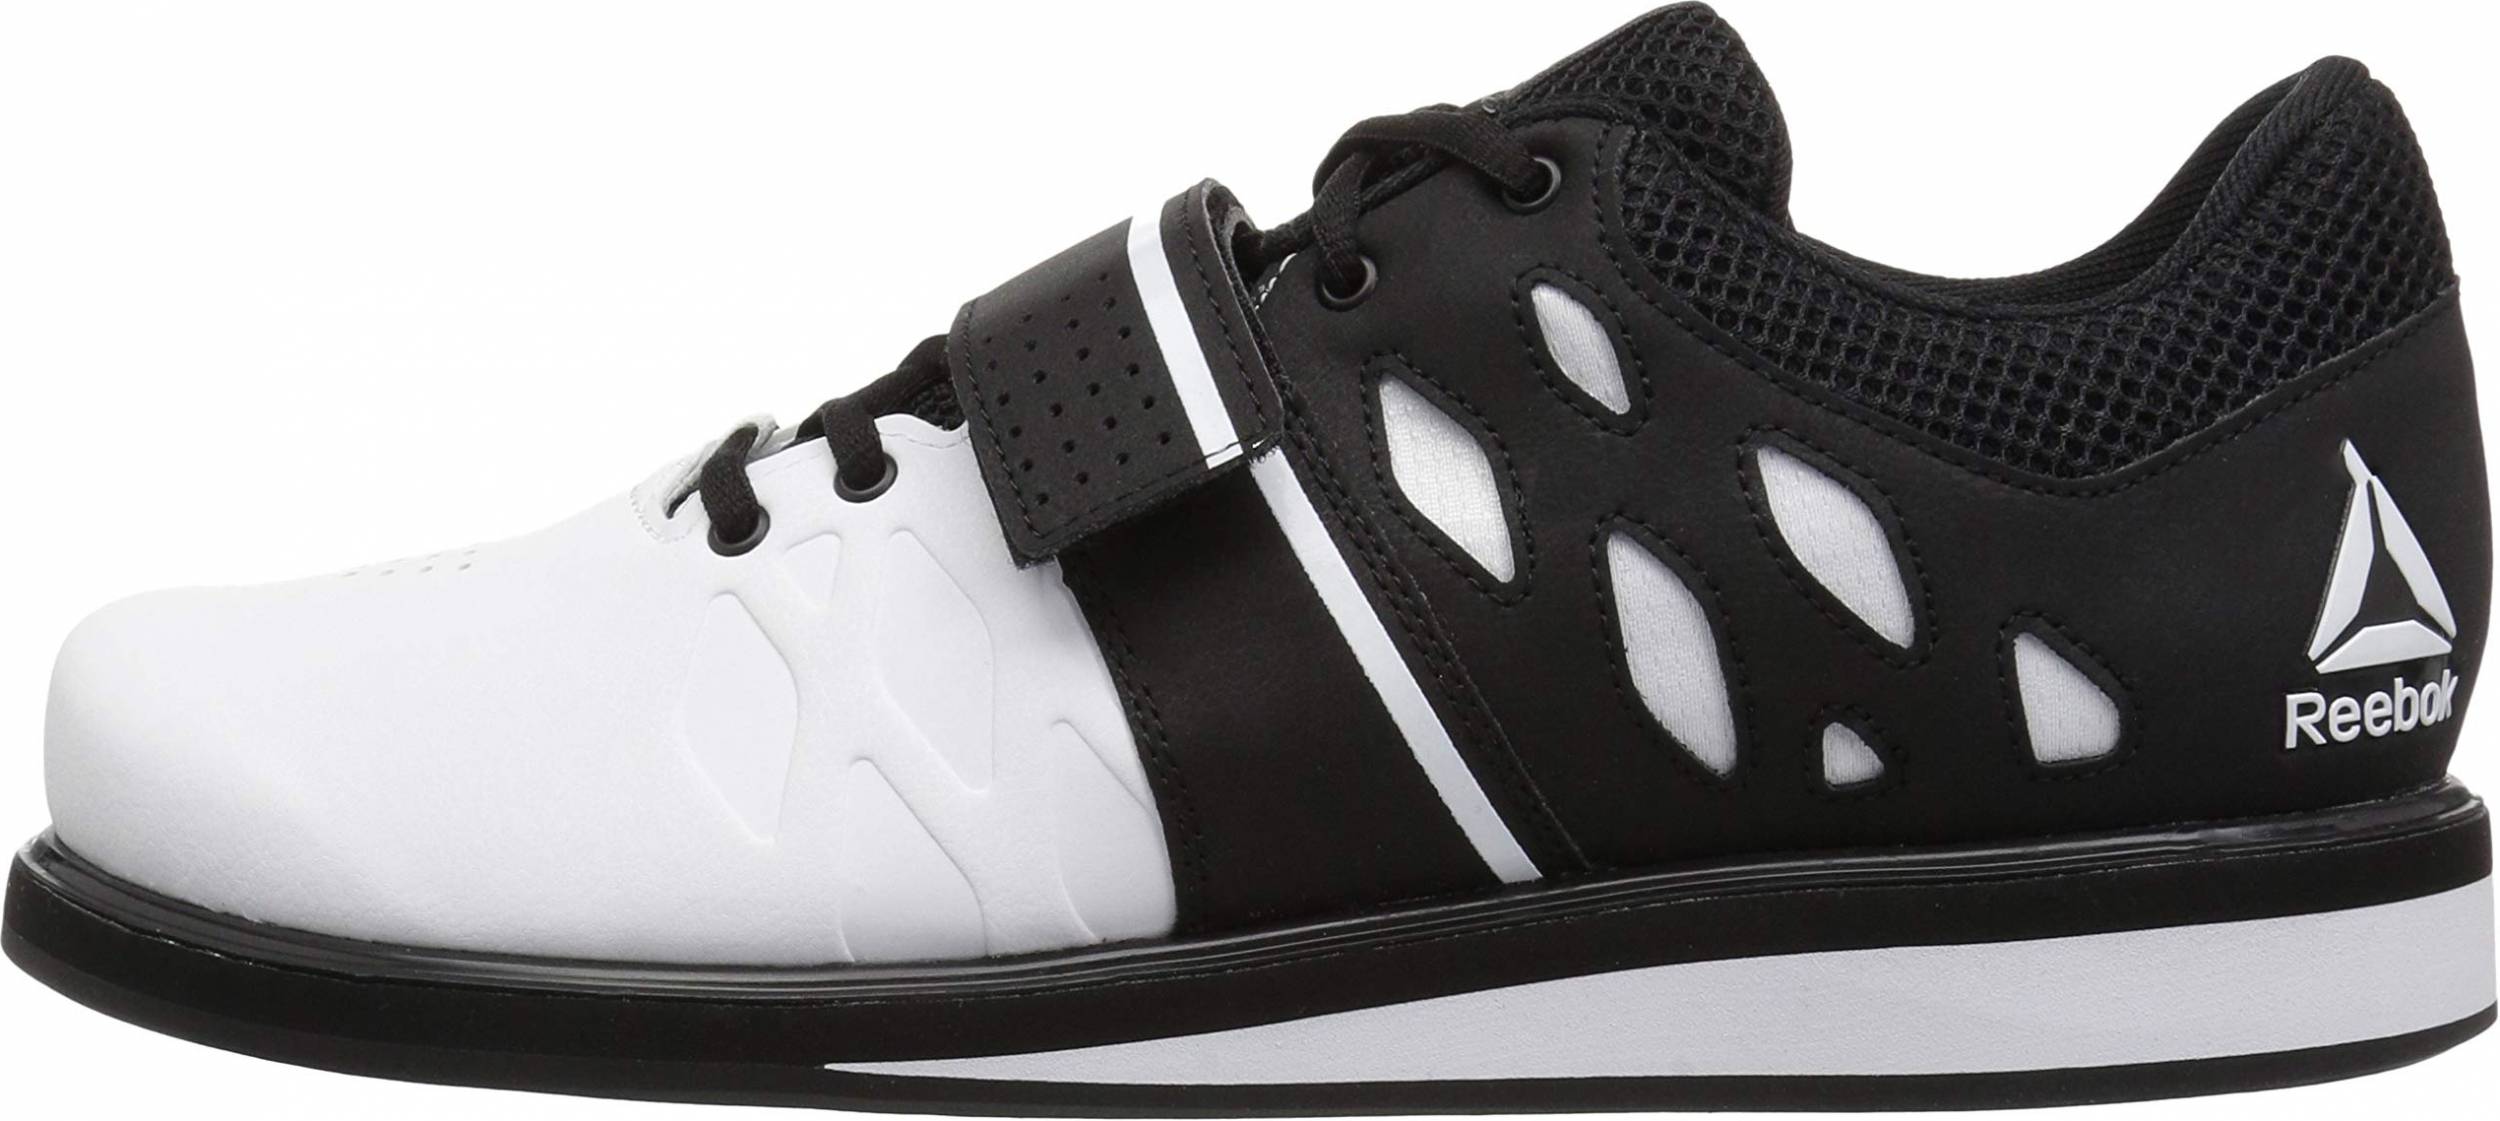 Save 62% on Weightlifting Shoes (24 